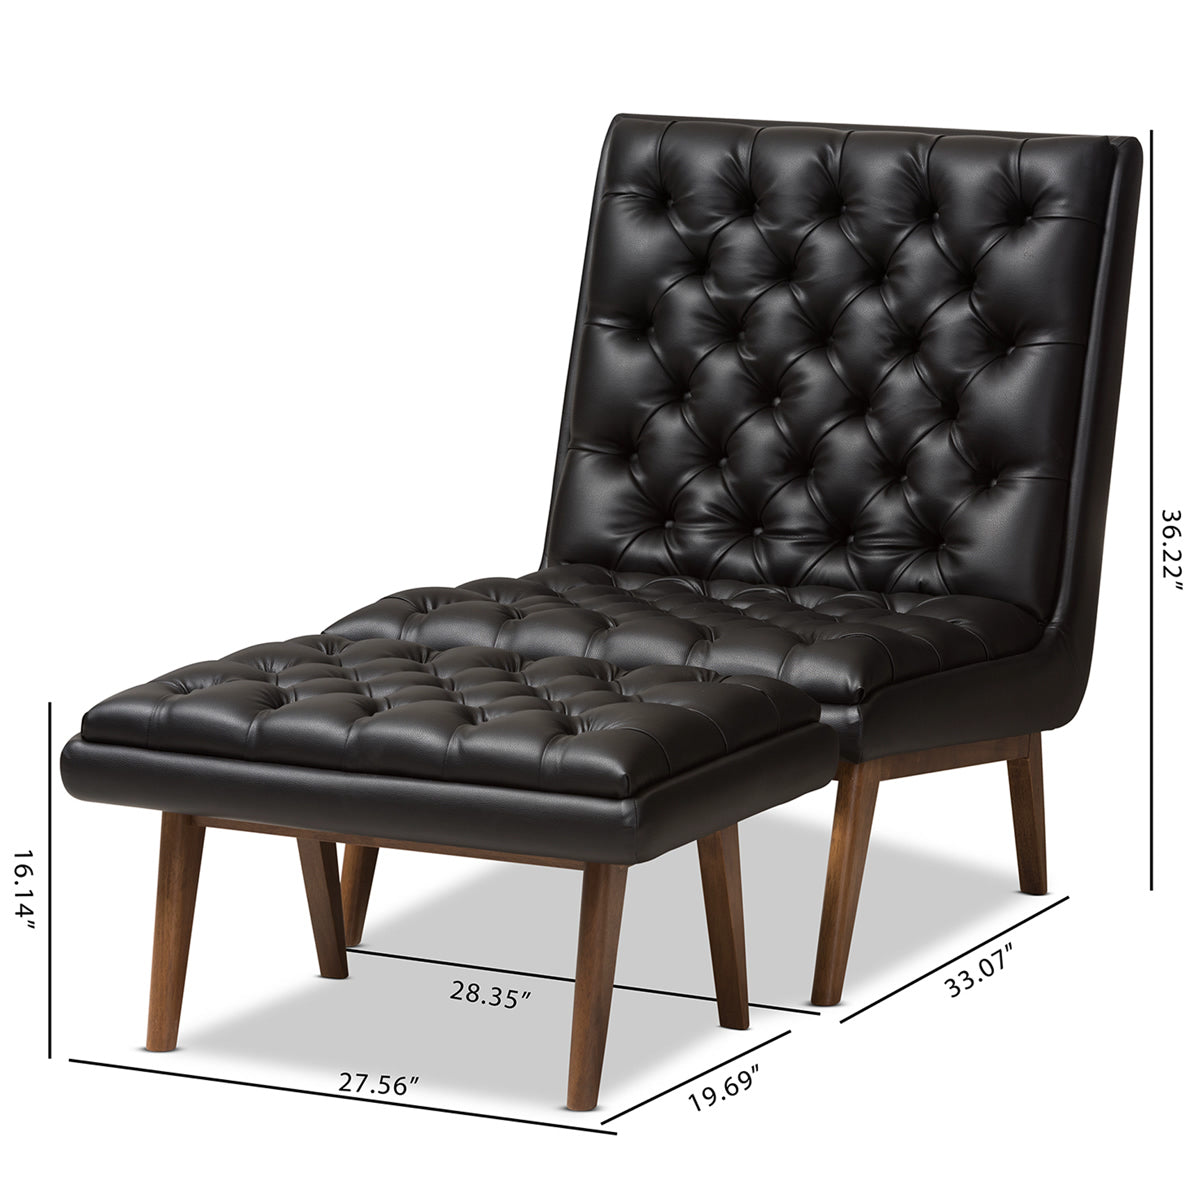 Baxton Studio Annetha Mid-Century Modern Black Faux Leather Upholstered Walnut Finished Wood Chair And Ottoman Set Baxton Studio-0-Minimal And Modern - 9